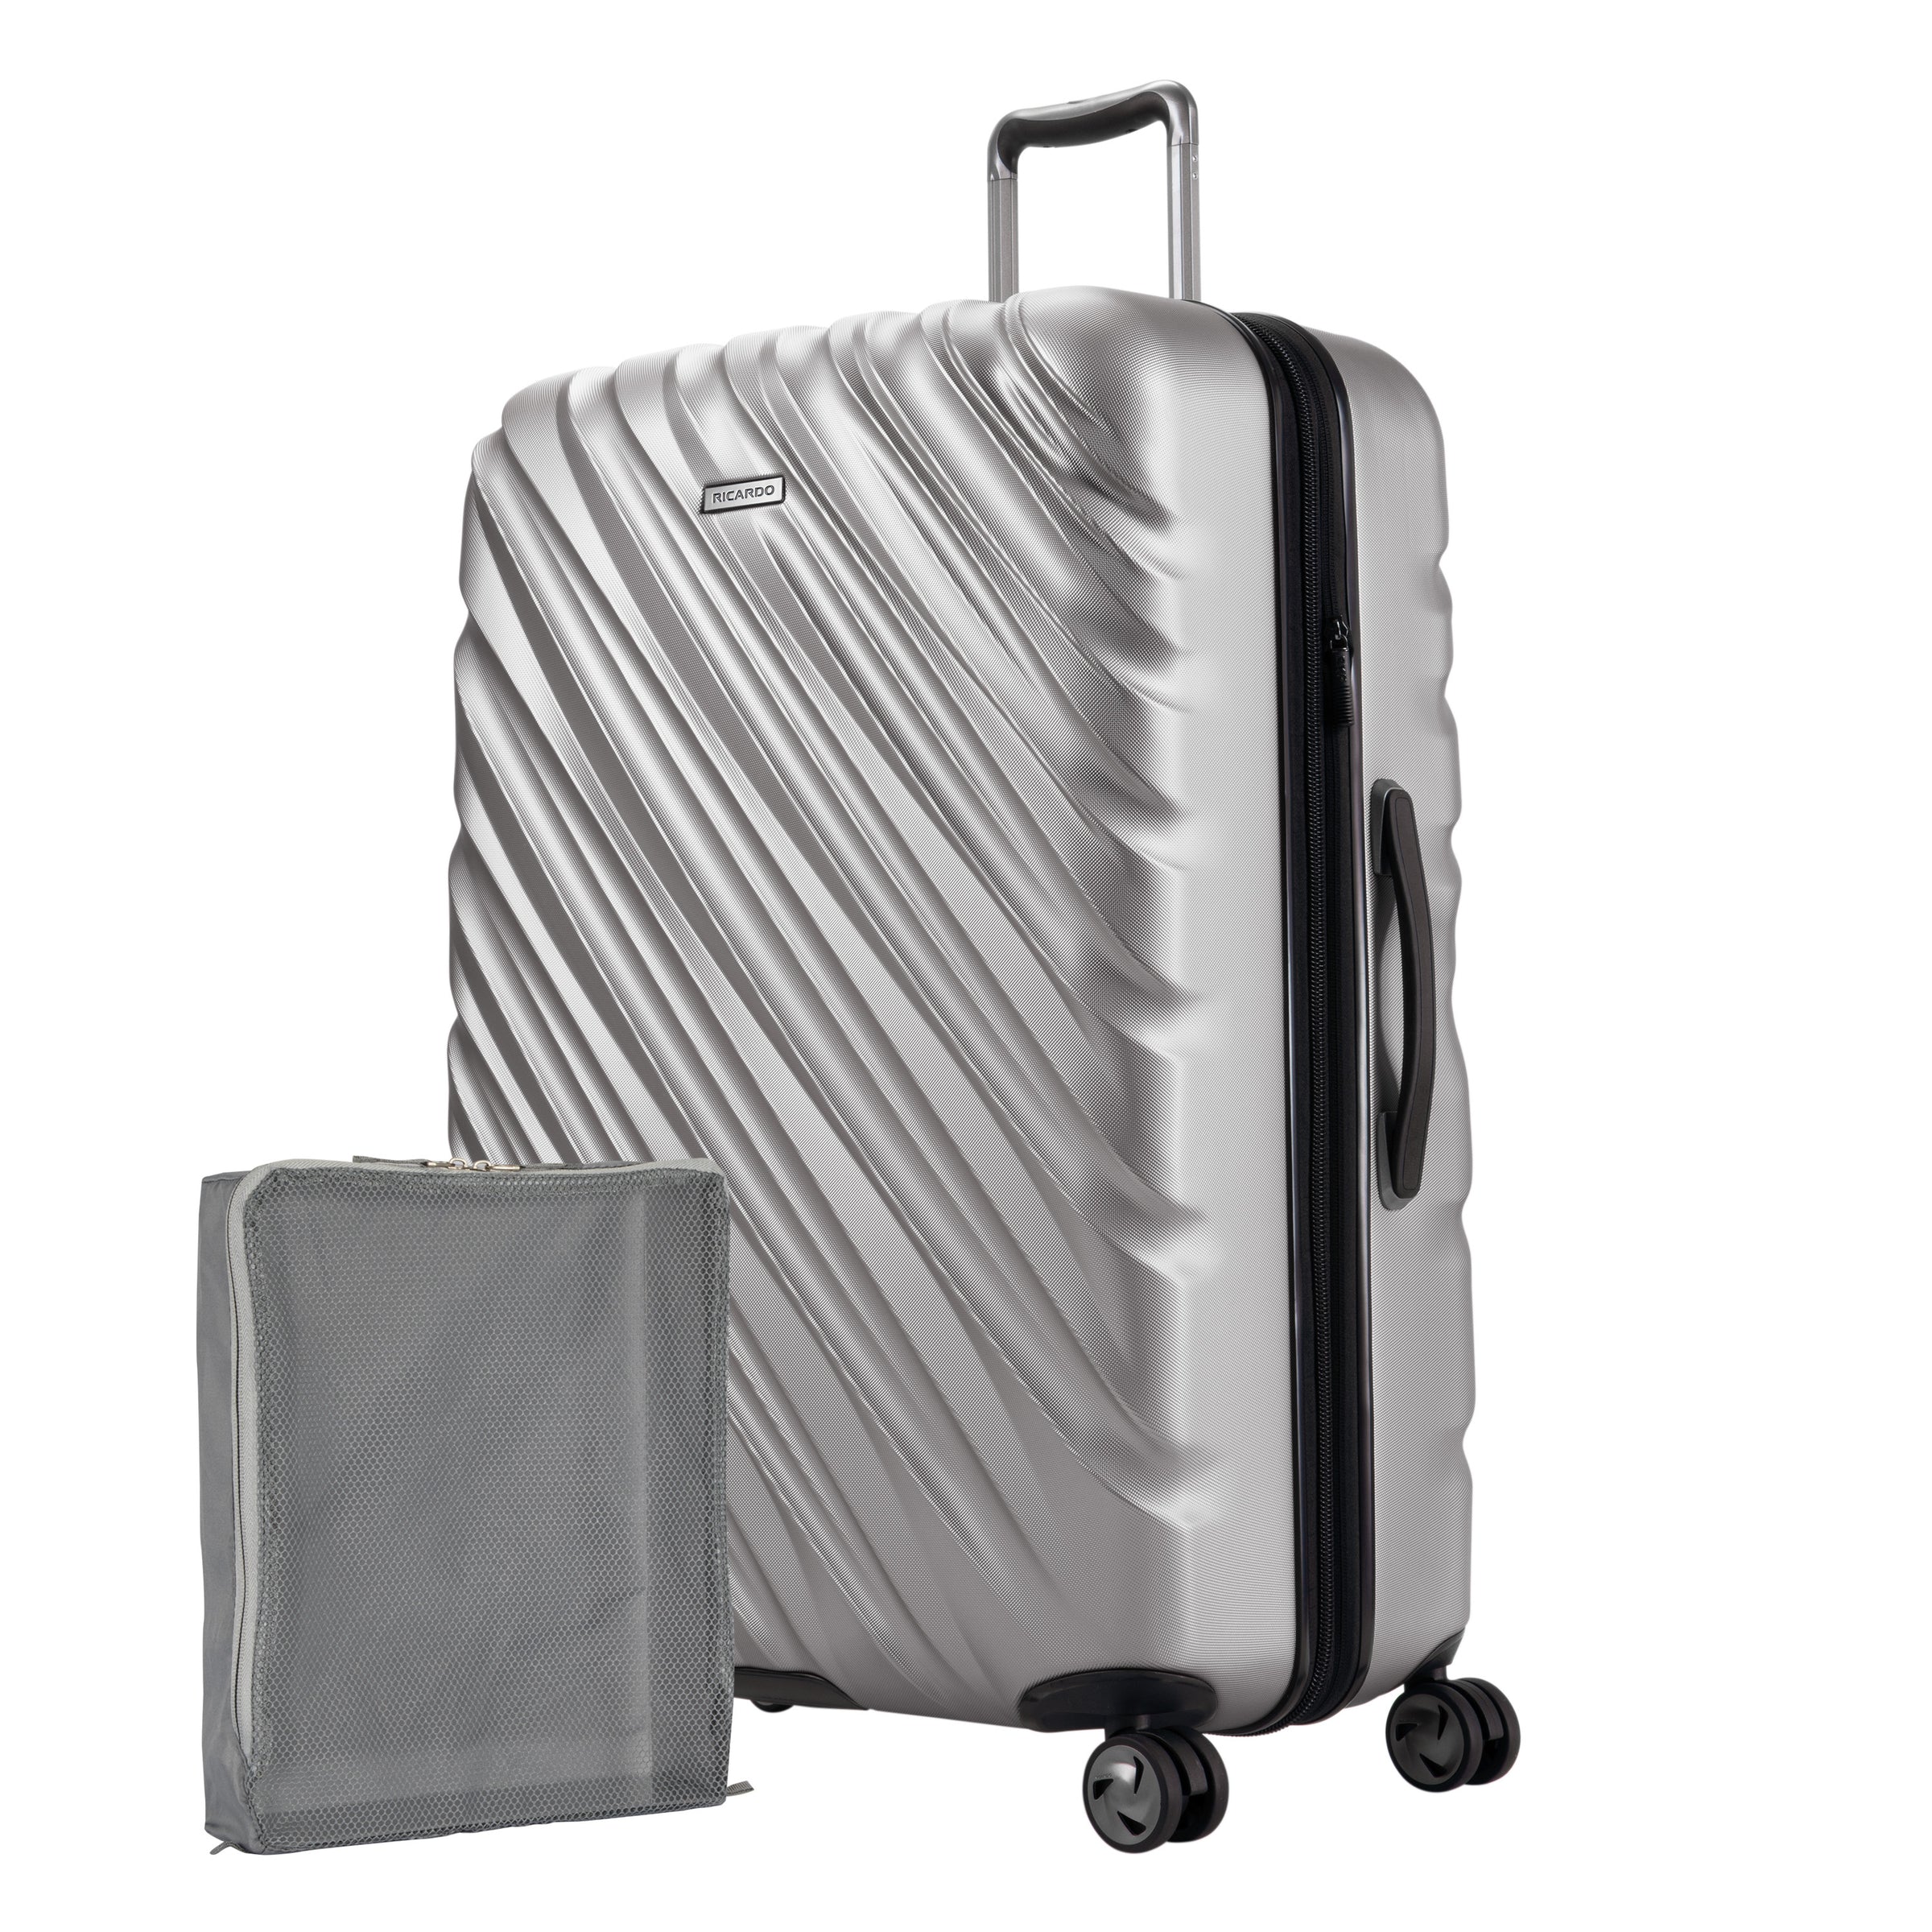 Platinum silver Ricardo Mojave carry-on hardside suitcase with diagonal grooves shown with a large grey packing cube